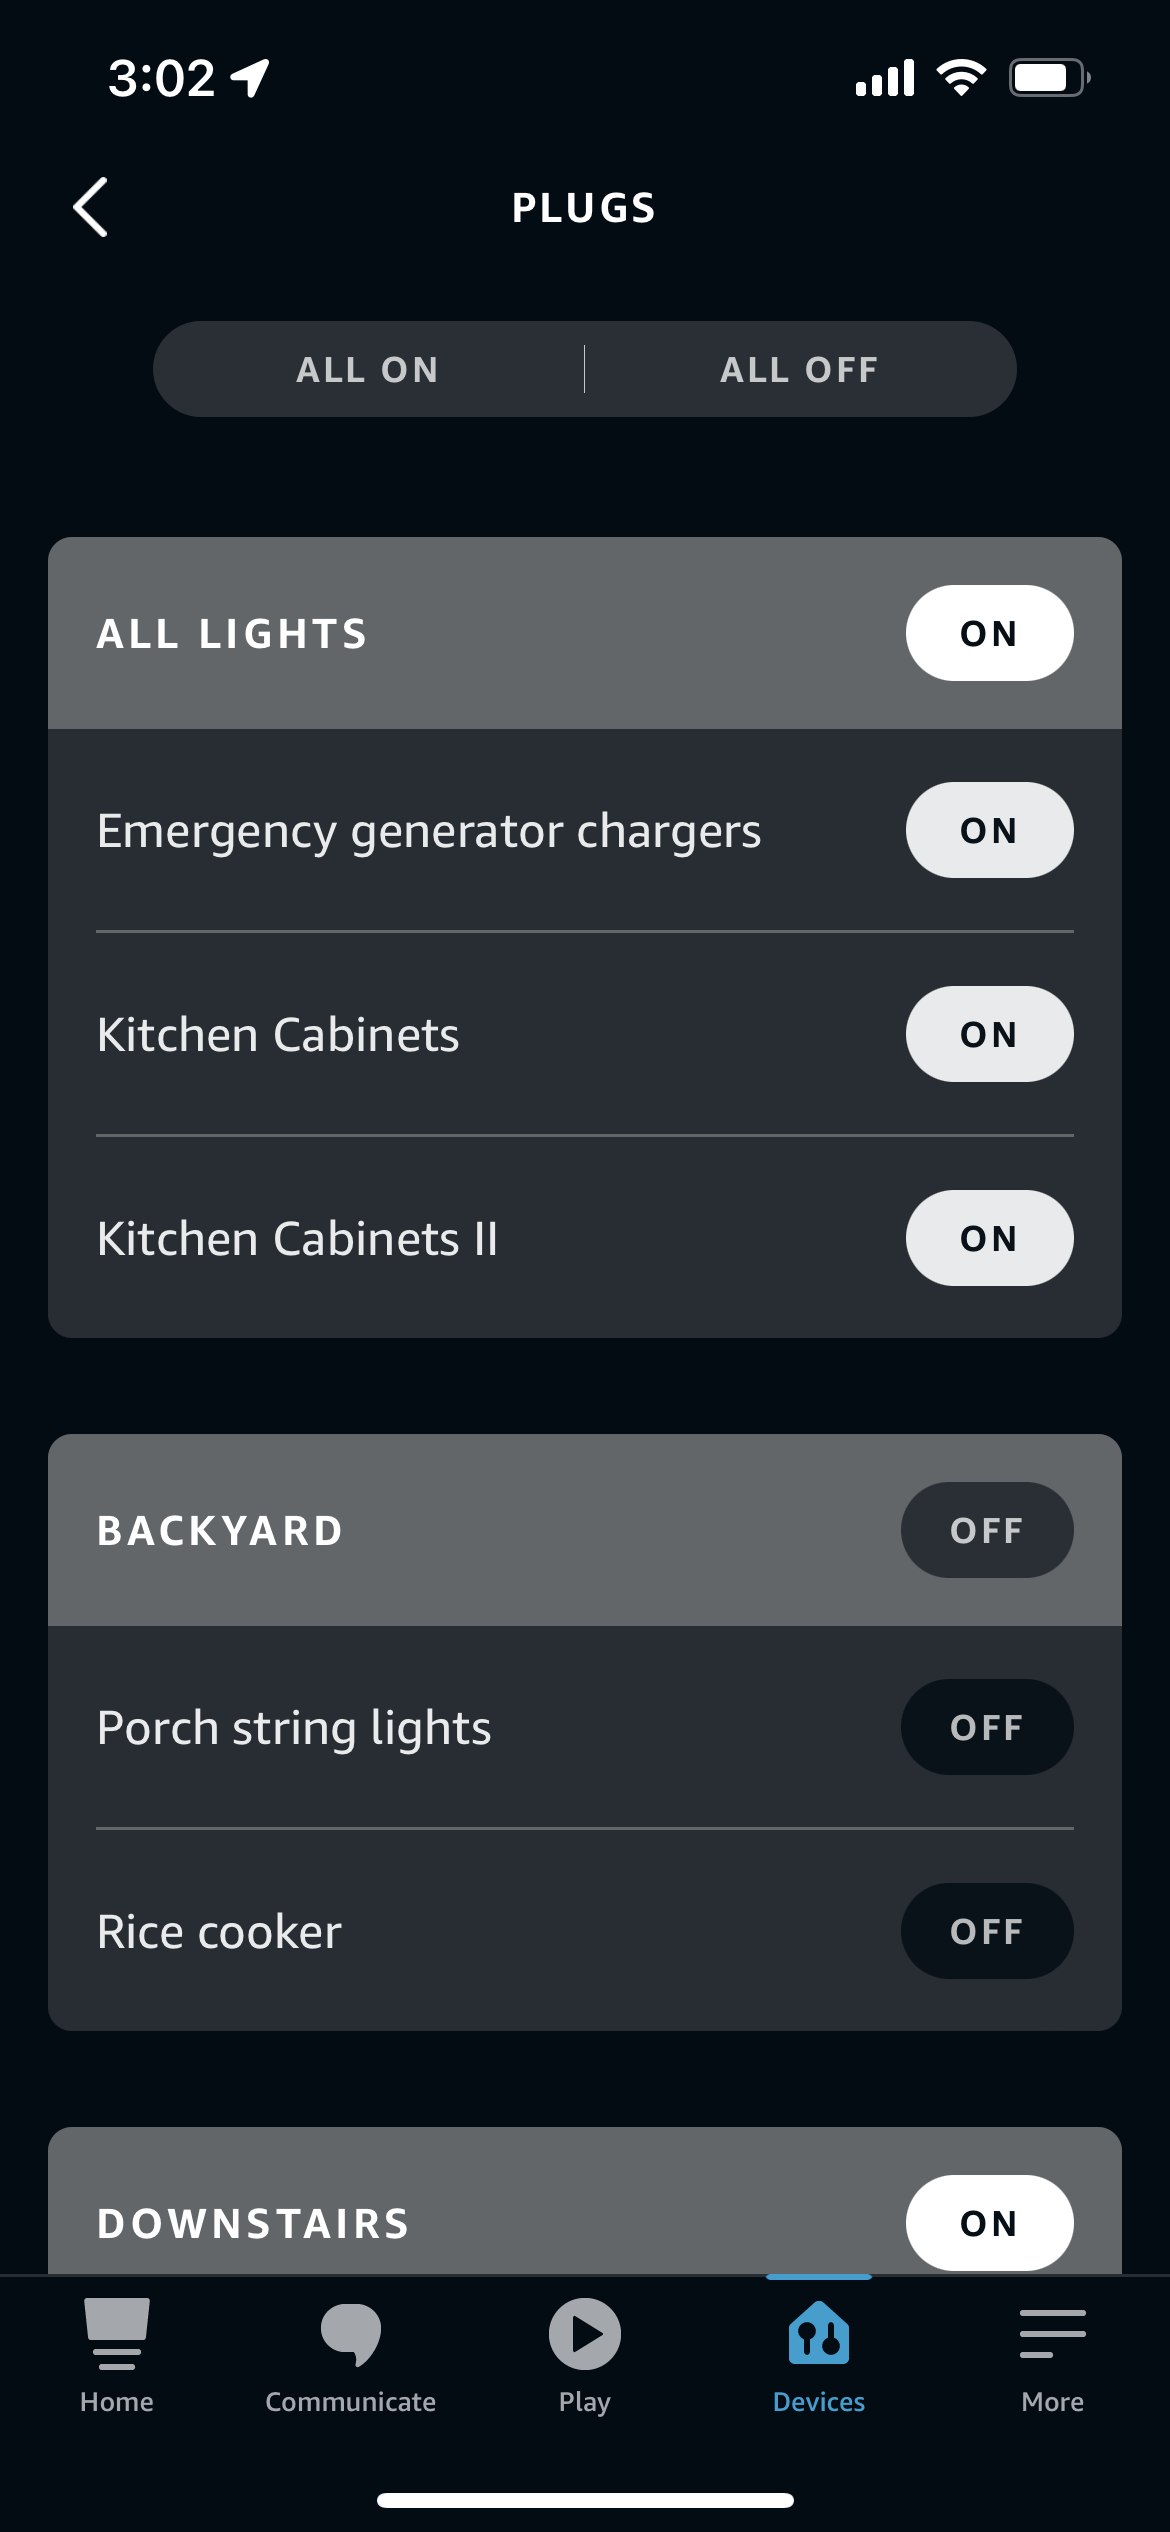 Viewing plugs in the Amazon Alexa Devices tab